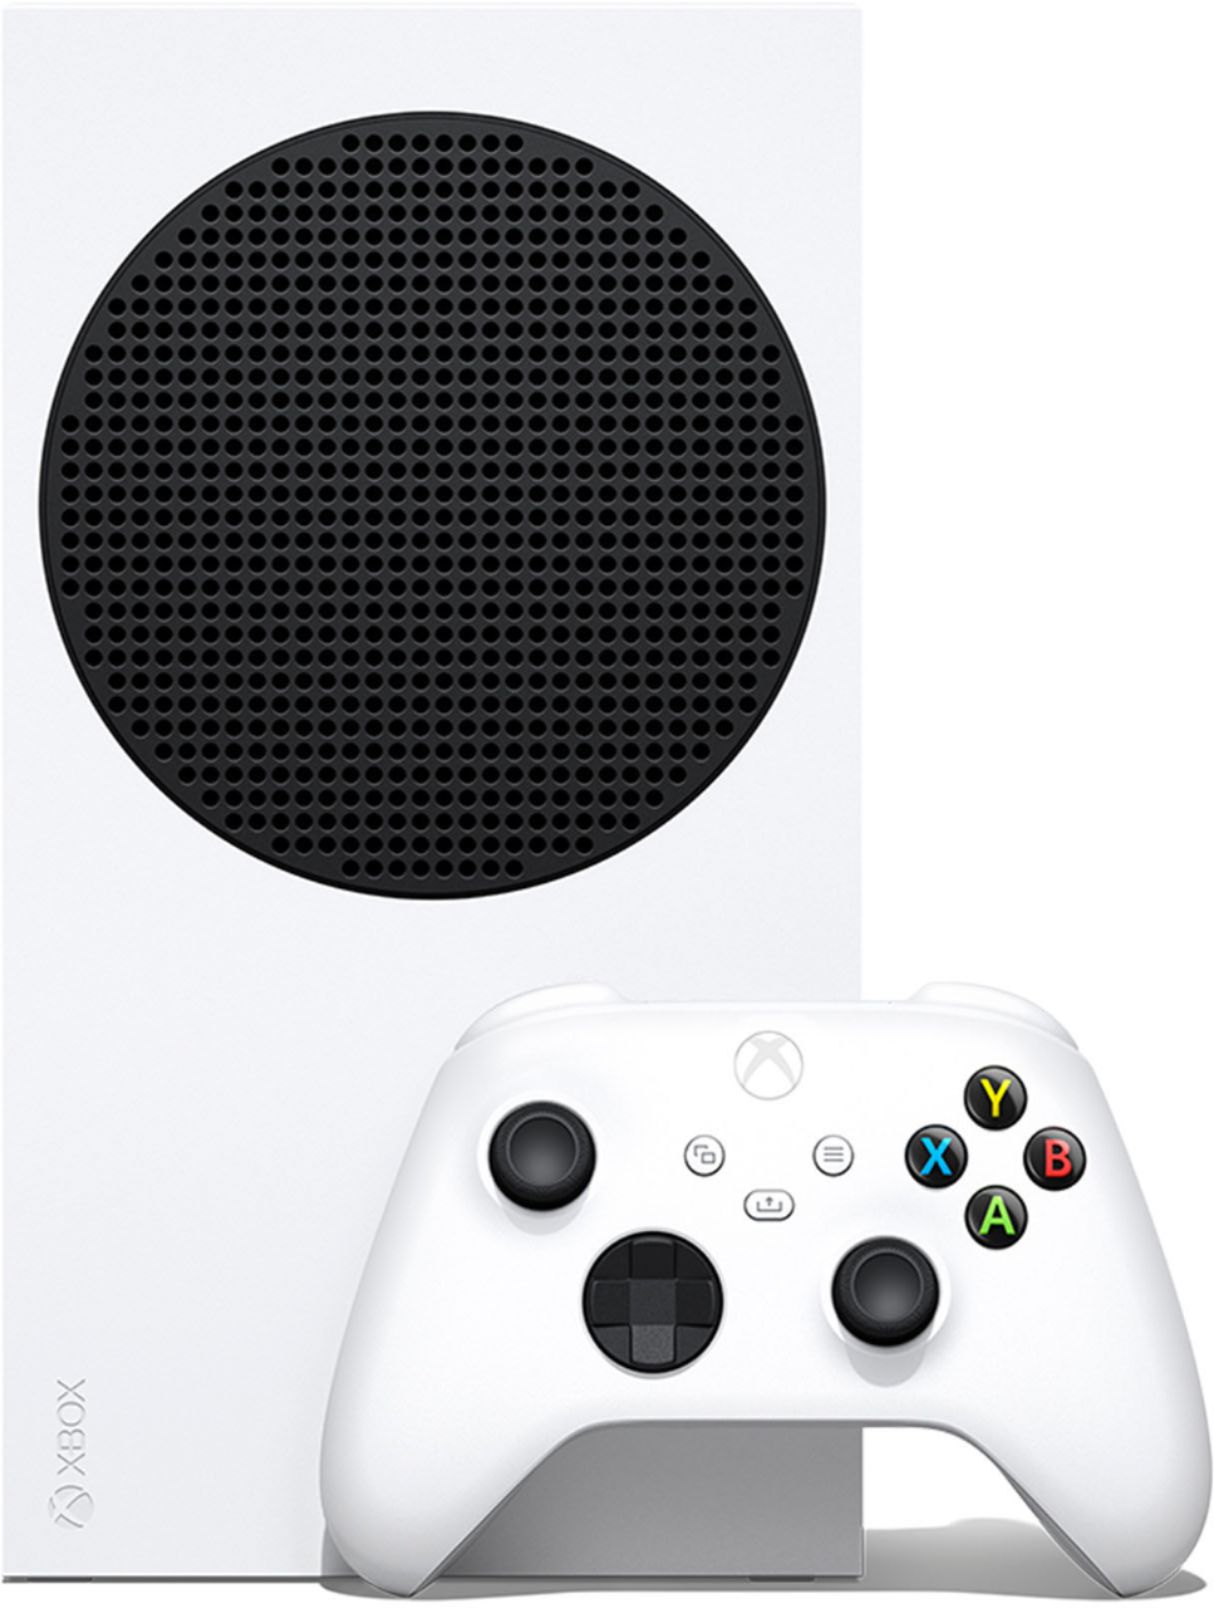 2020 New Xbox 512GB SSD Console -Robot White - image 1 of 5